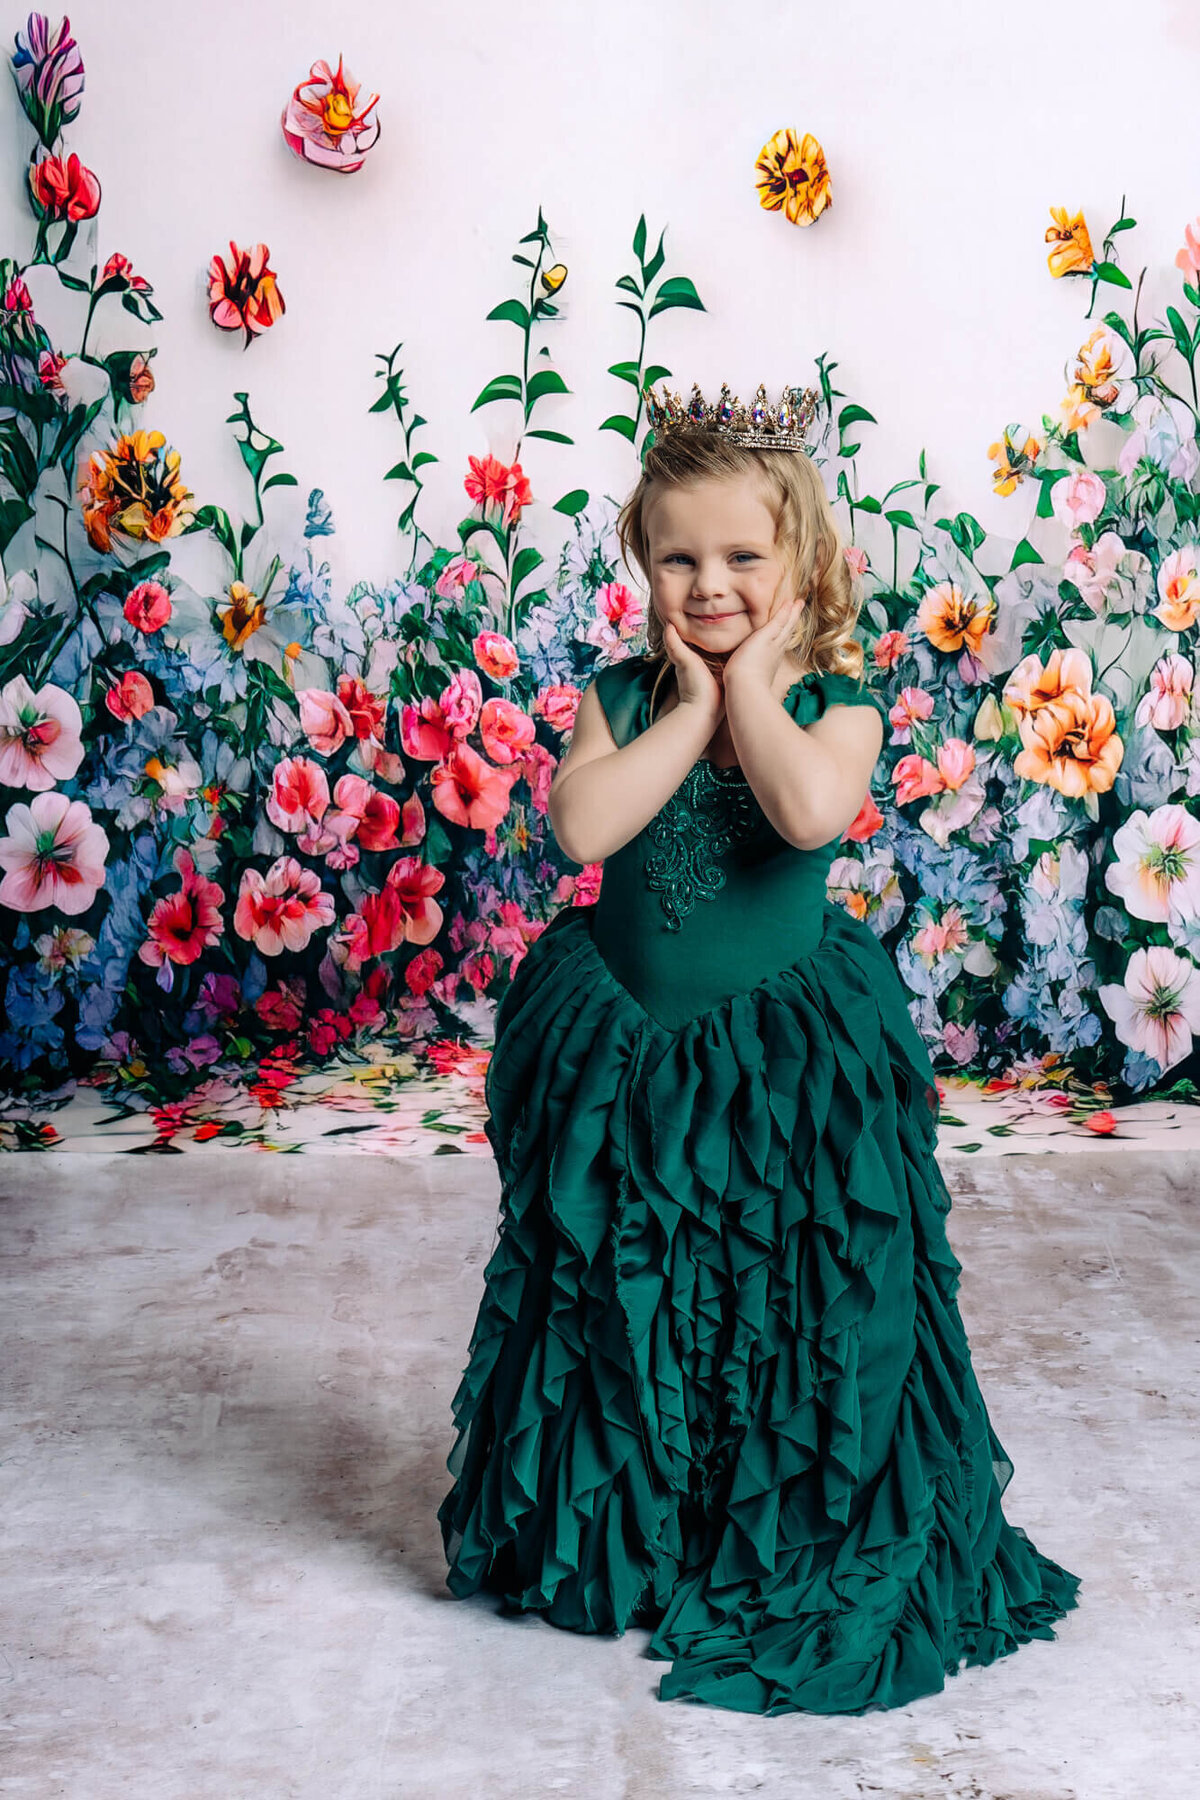 Prescott princess kids photo session with green layered dress against floral wall